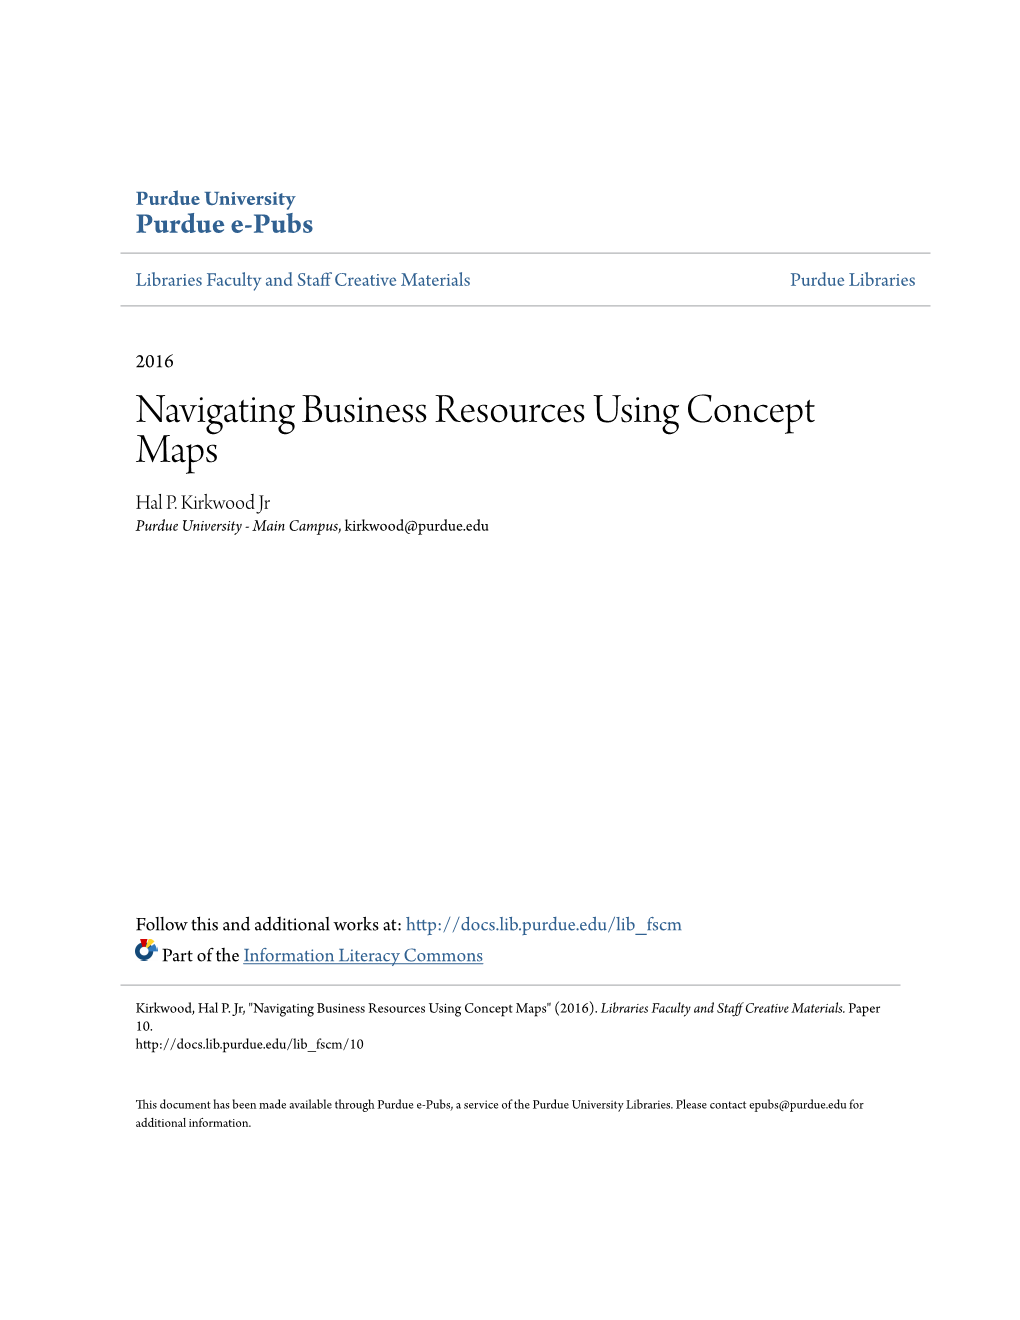 Navigating Business Resources Using Concept Maps Hal P